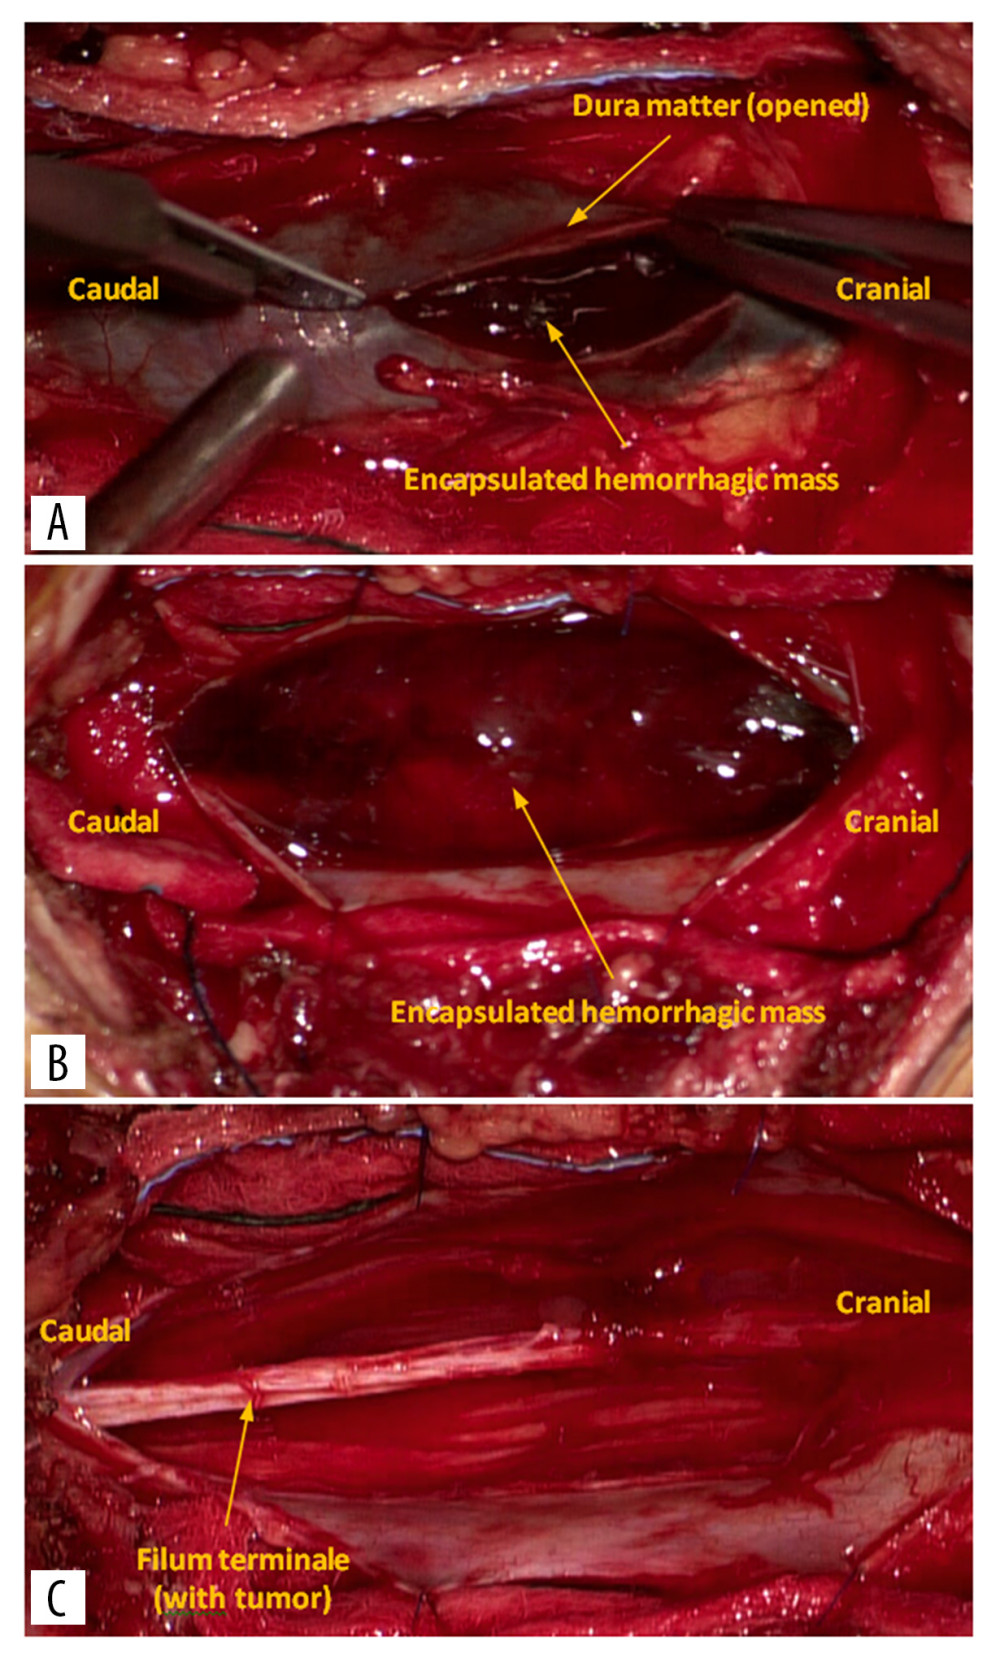 Intraoperative view of lumbosacral hemorrhagic myxopapillary ependymoma (A) during dural opening, (B) after full exposure revealing the encapsulated hemorrhagic mass, and (C) after removal of the tumor.